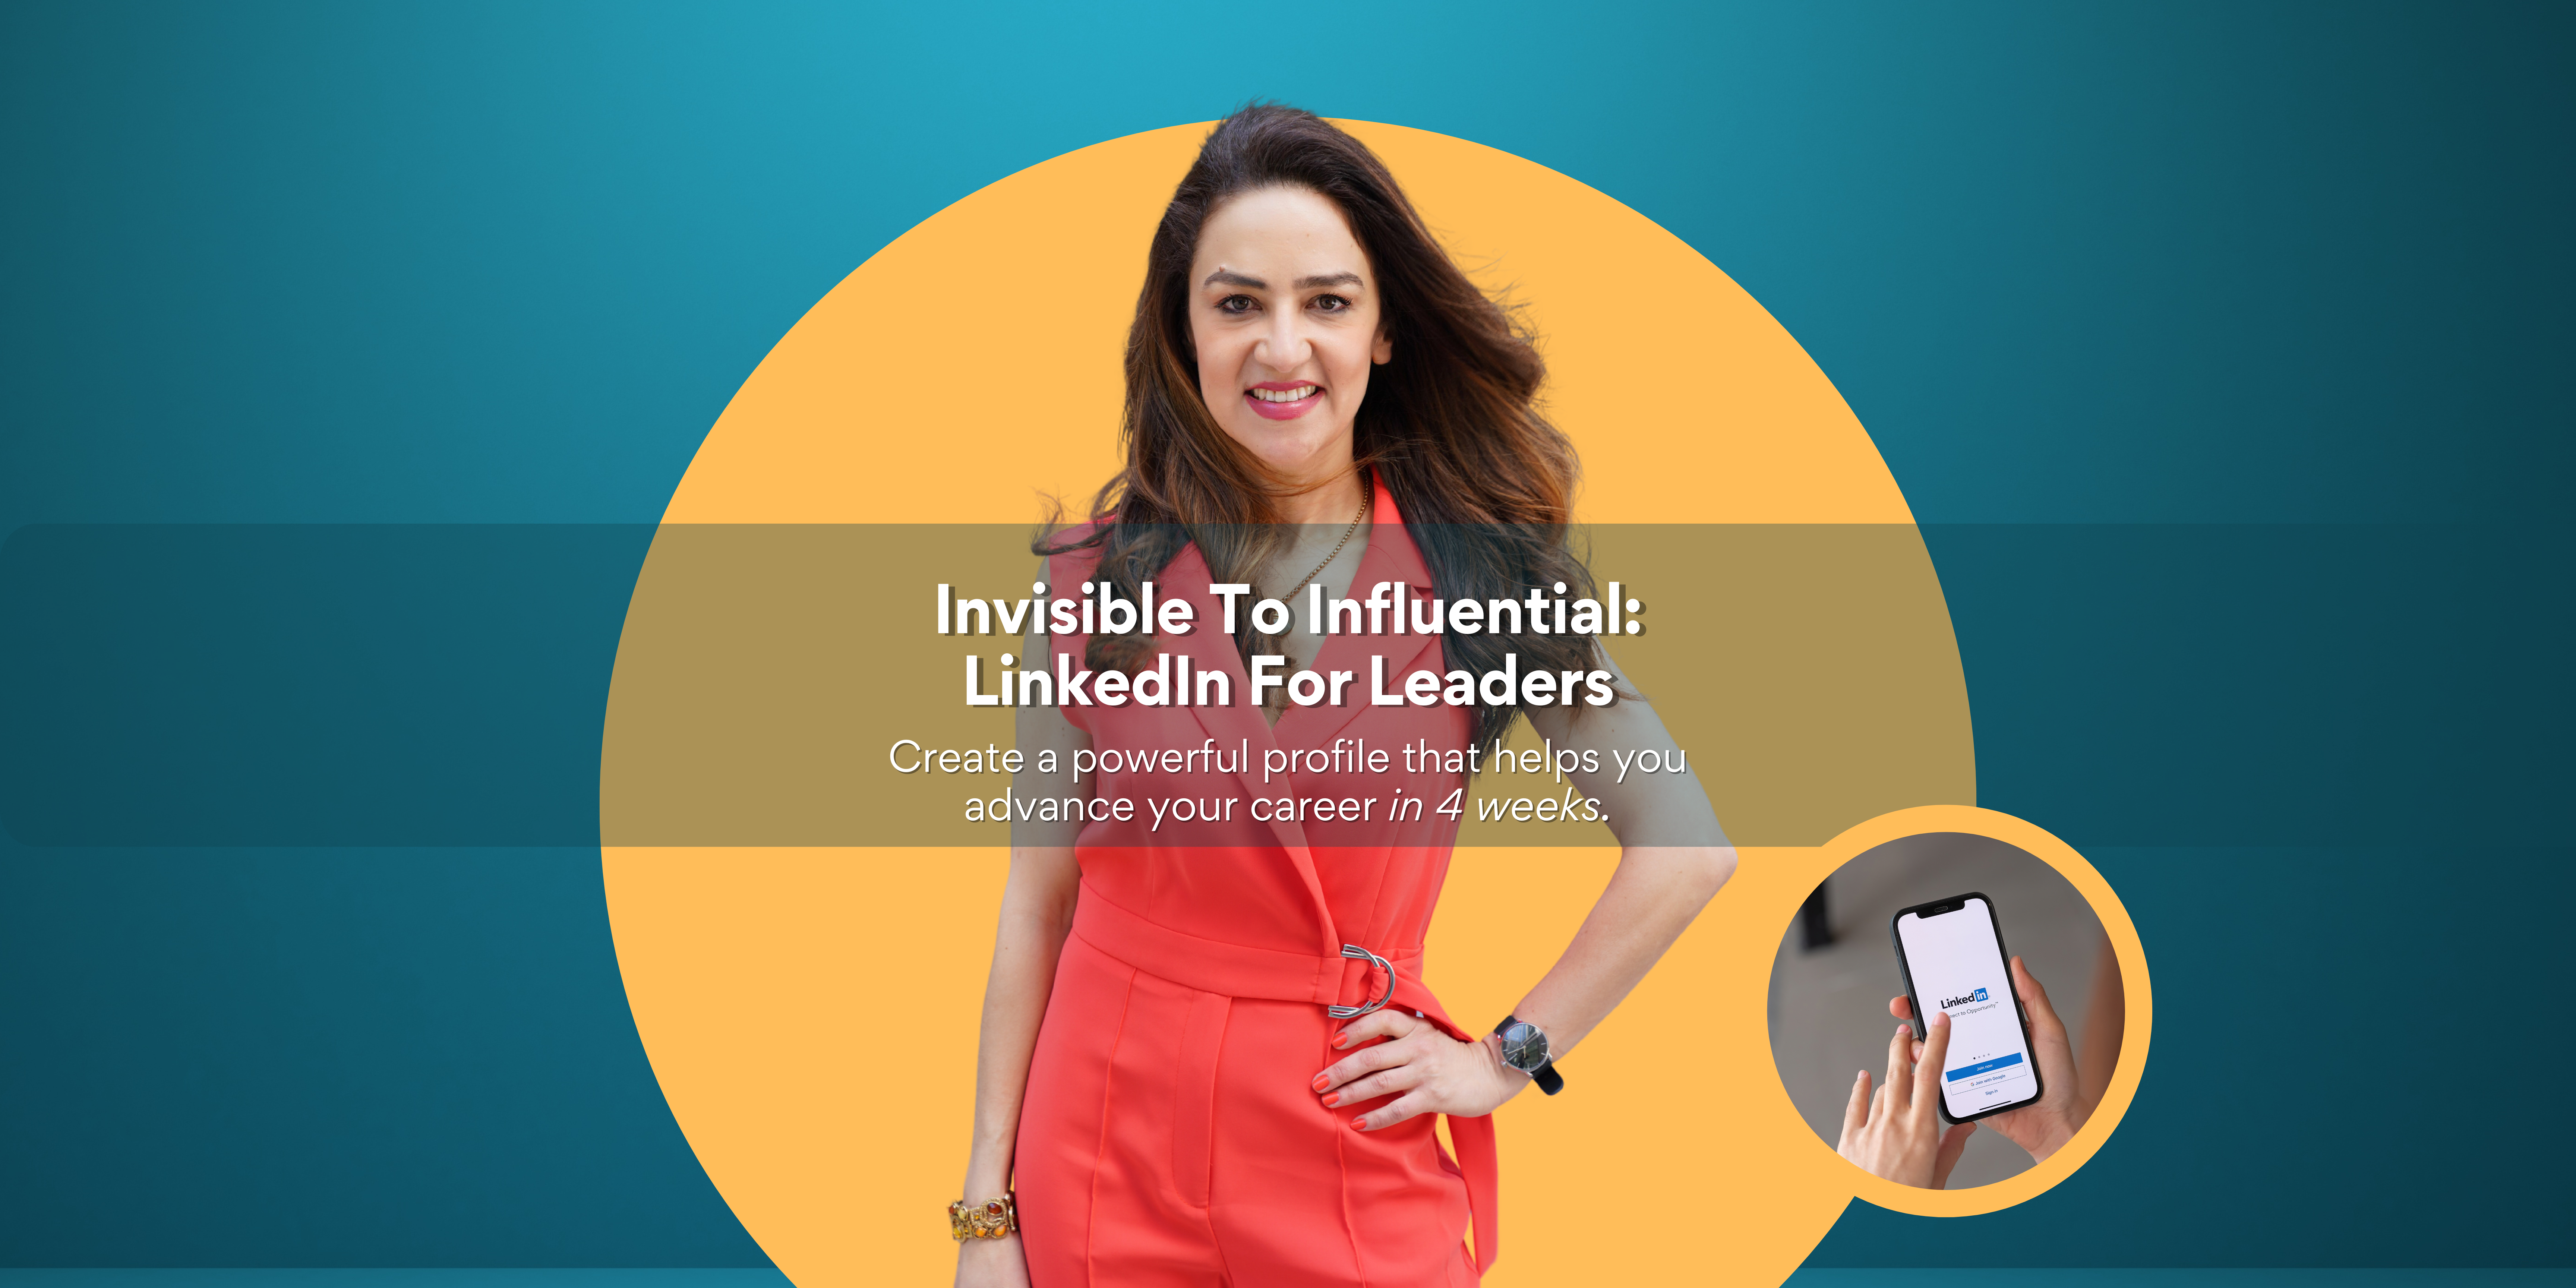  Invisible to Influential: LinkedIn for Leaders. Create a powerful profile that helps you advance your career in 4 weeks.